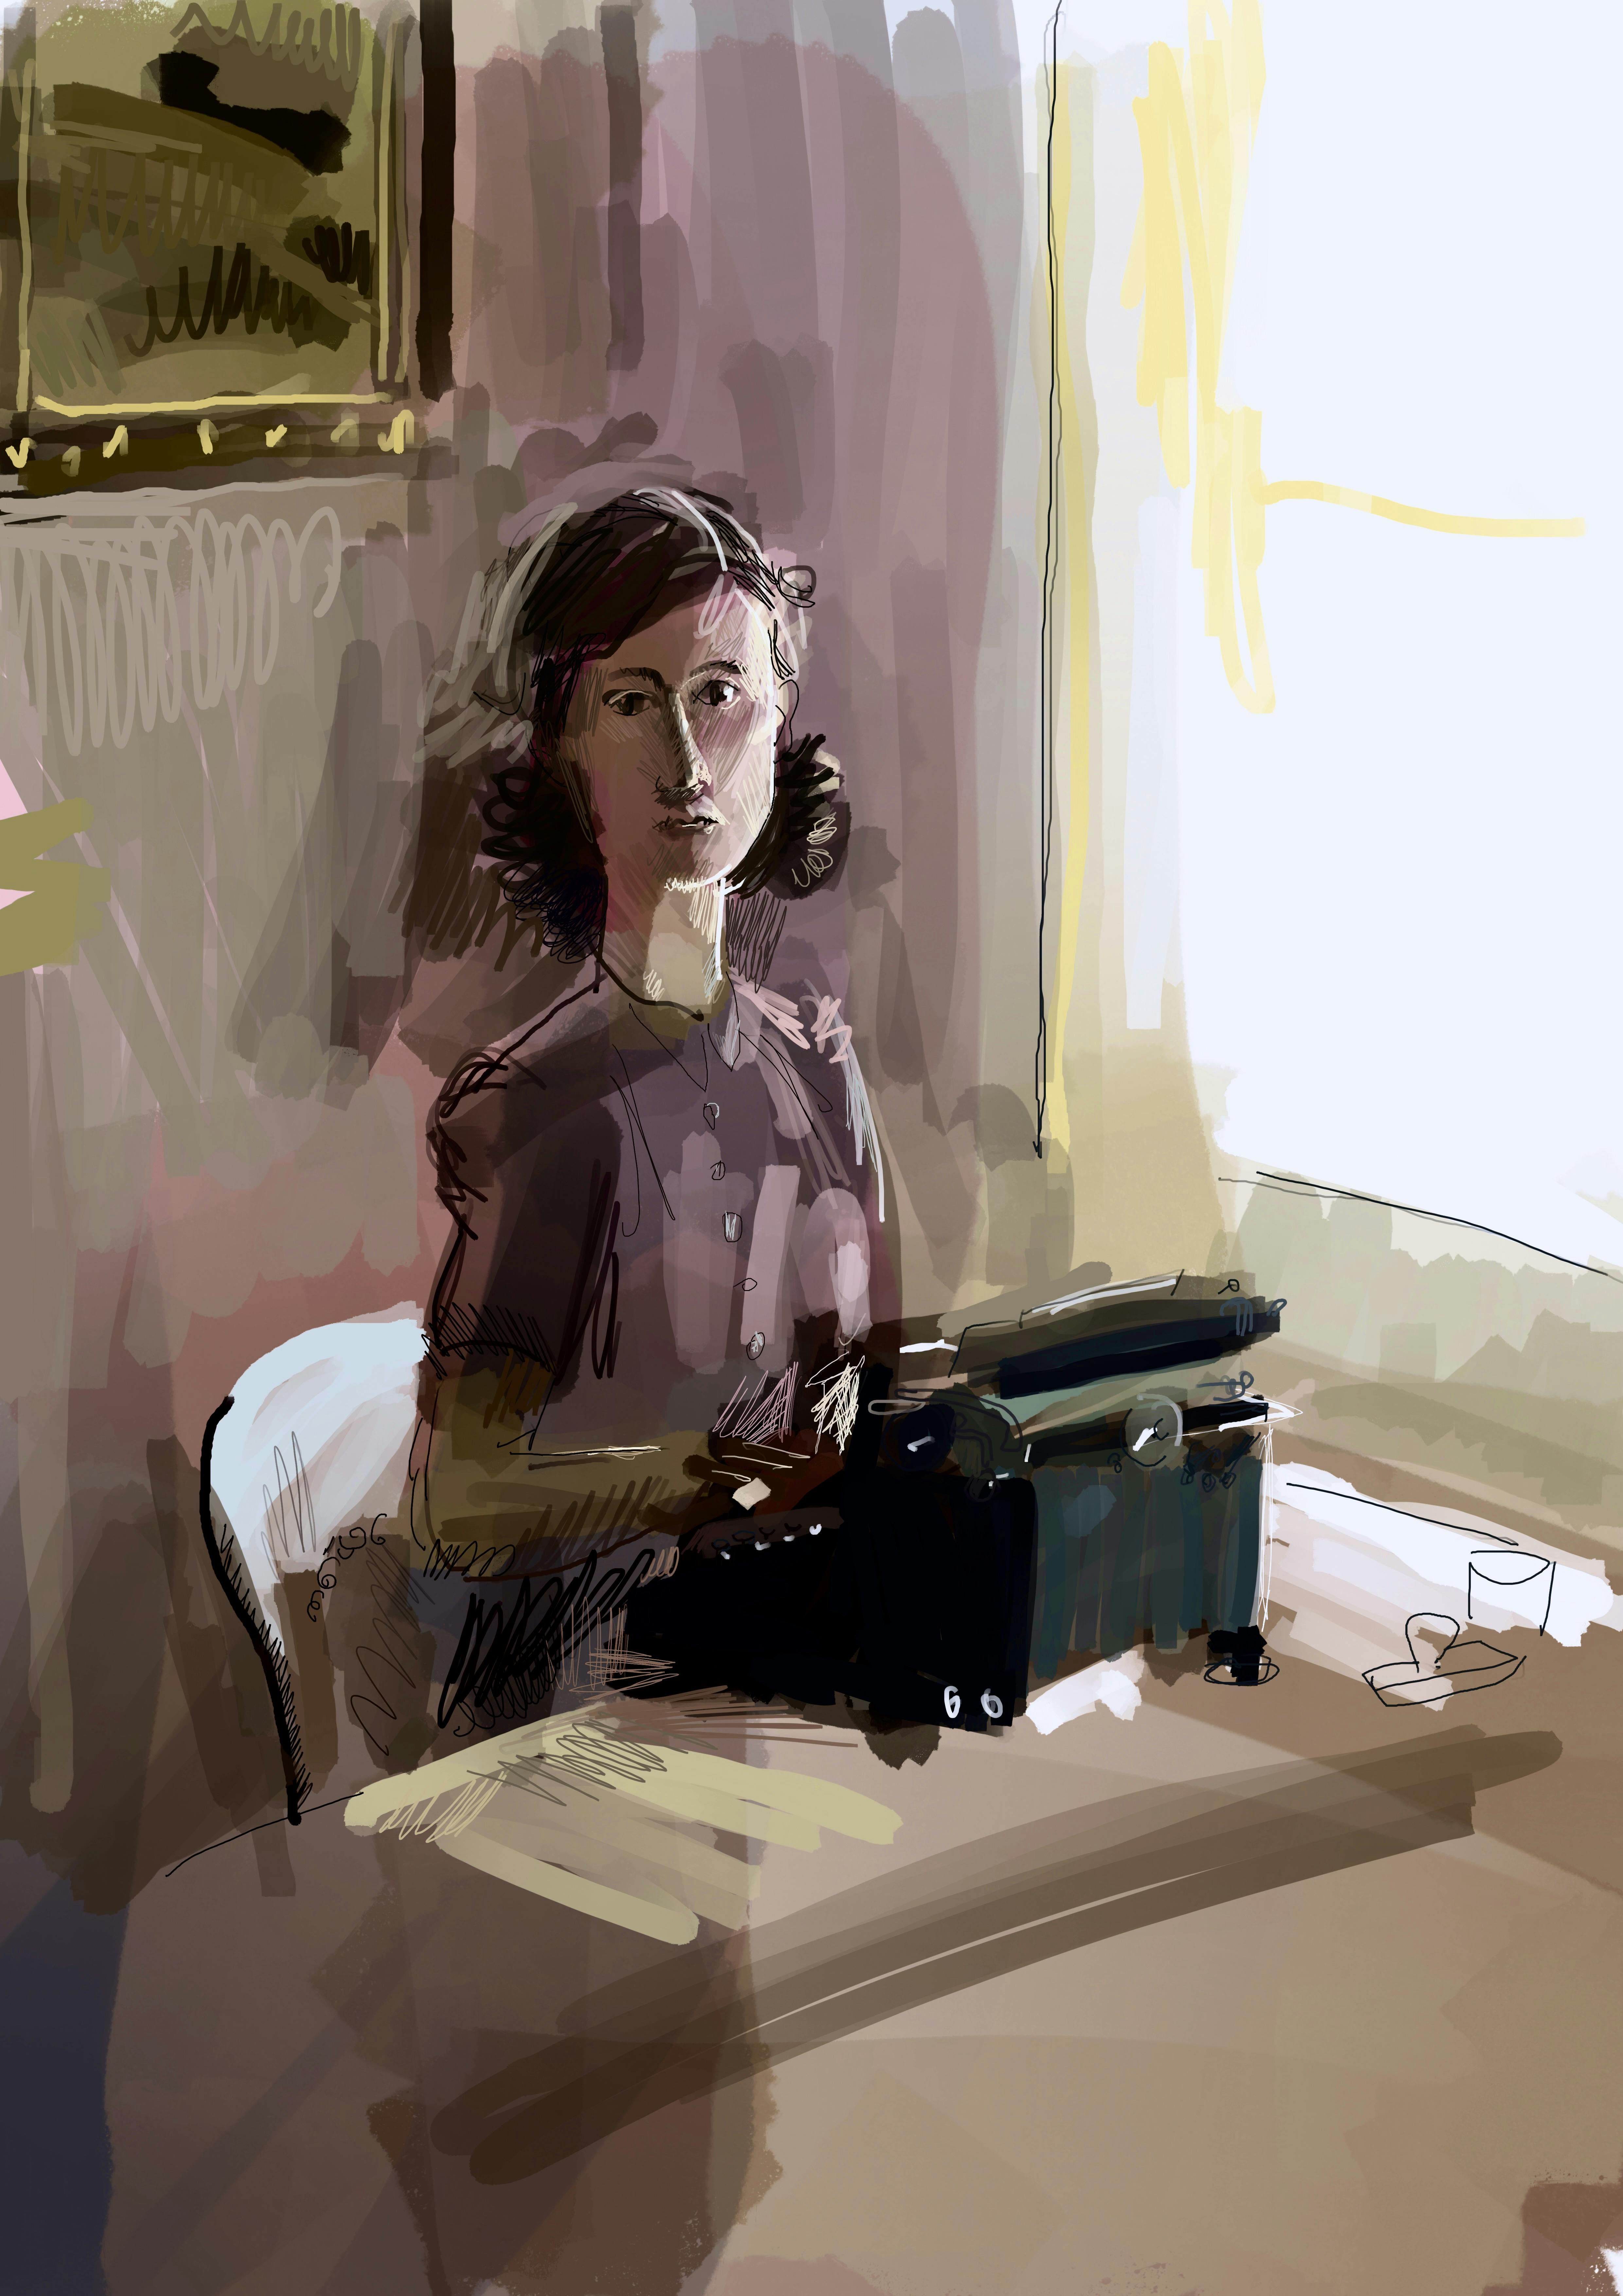 Atmospheric drawing of a woman in the 1940s, sitting behind a typewriter